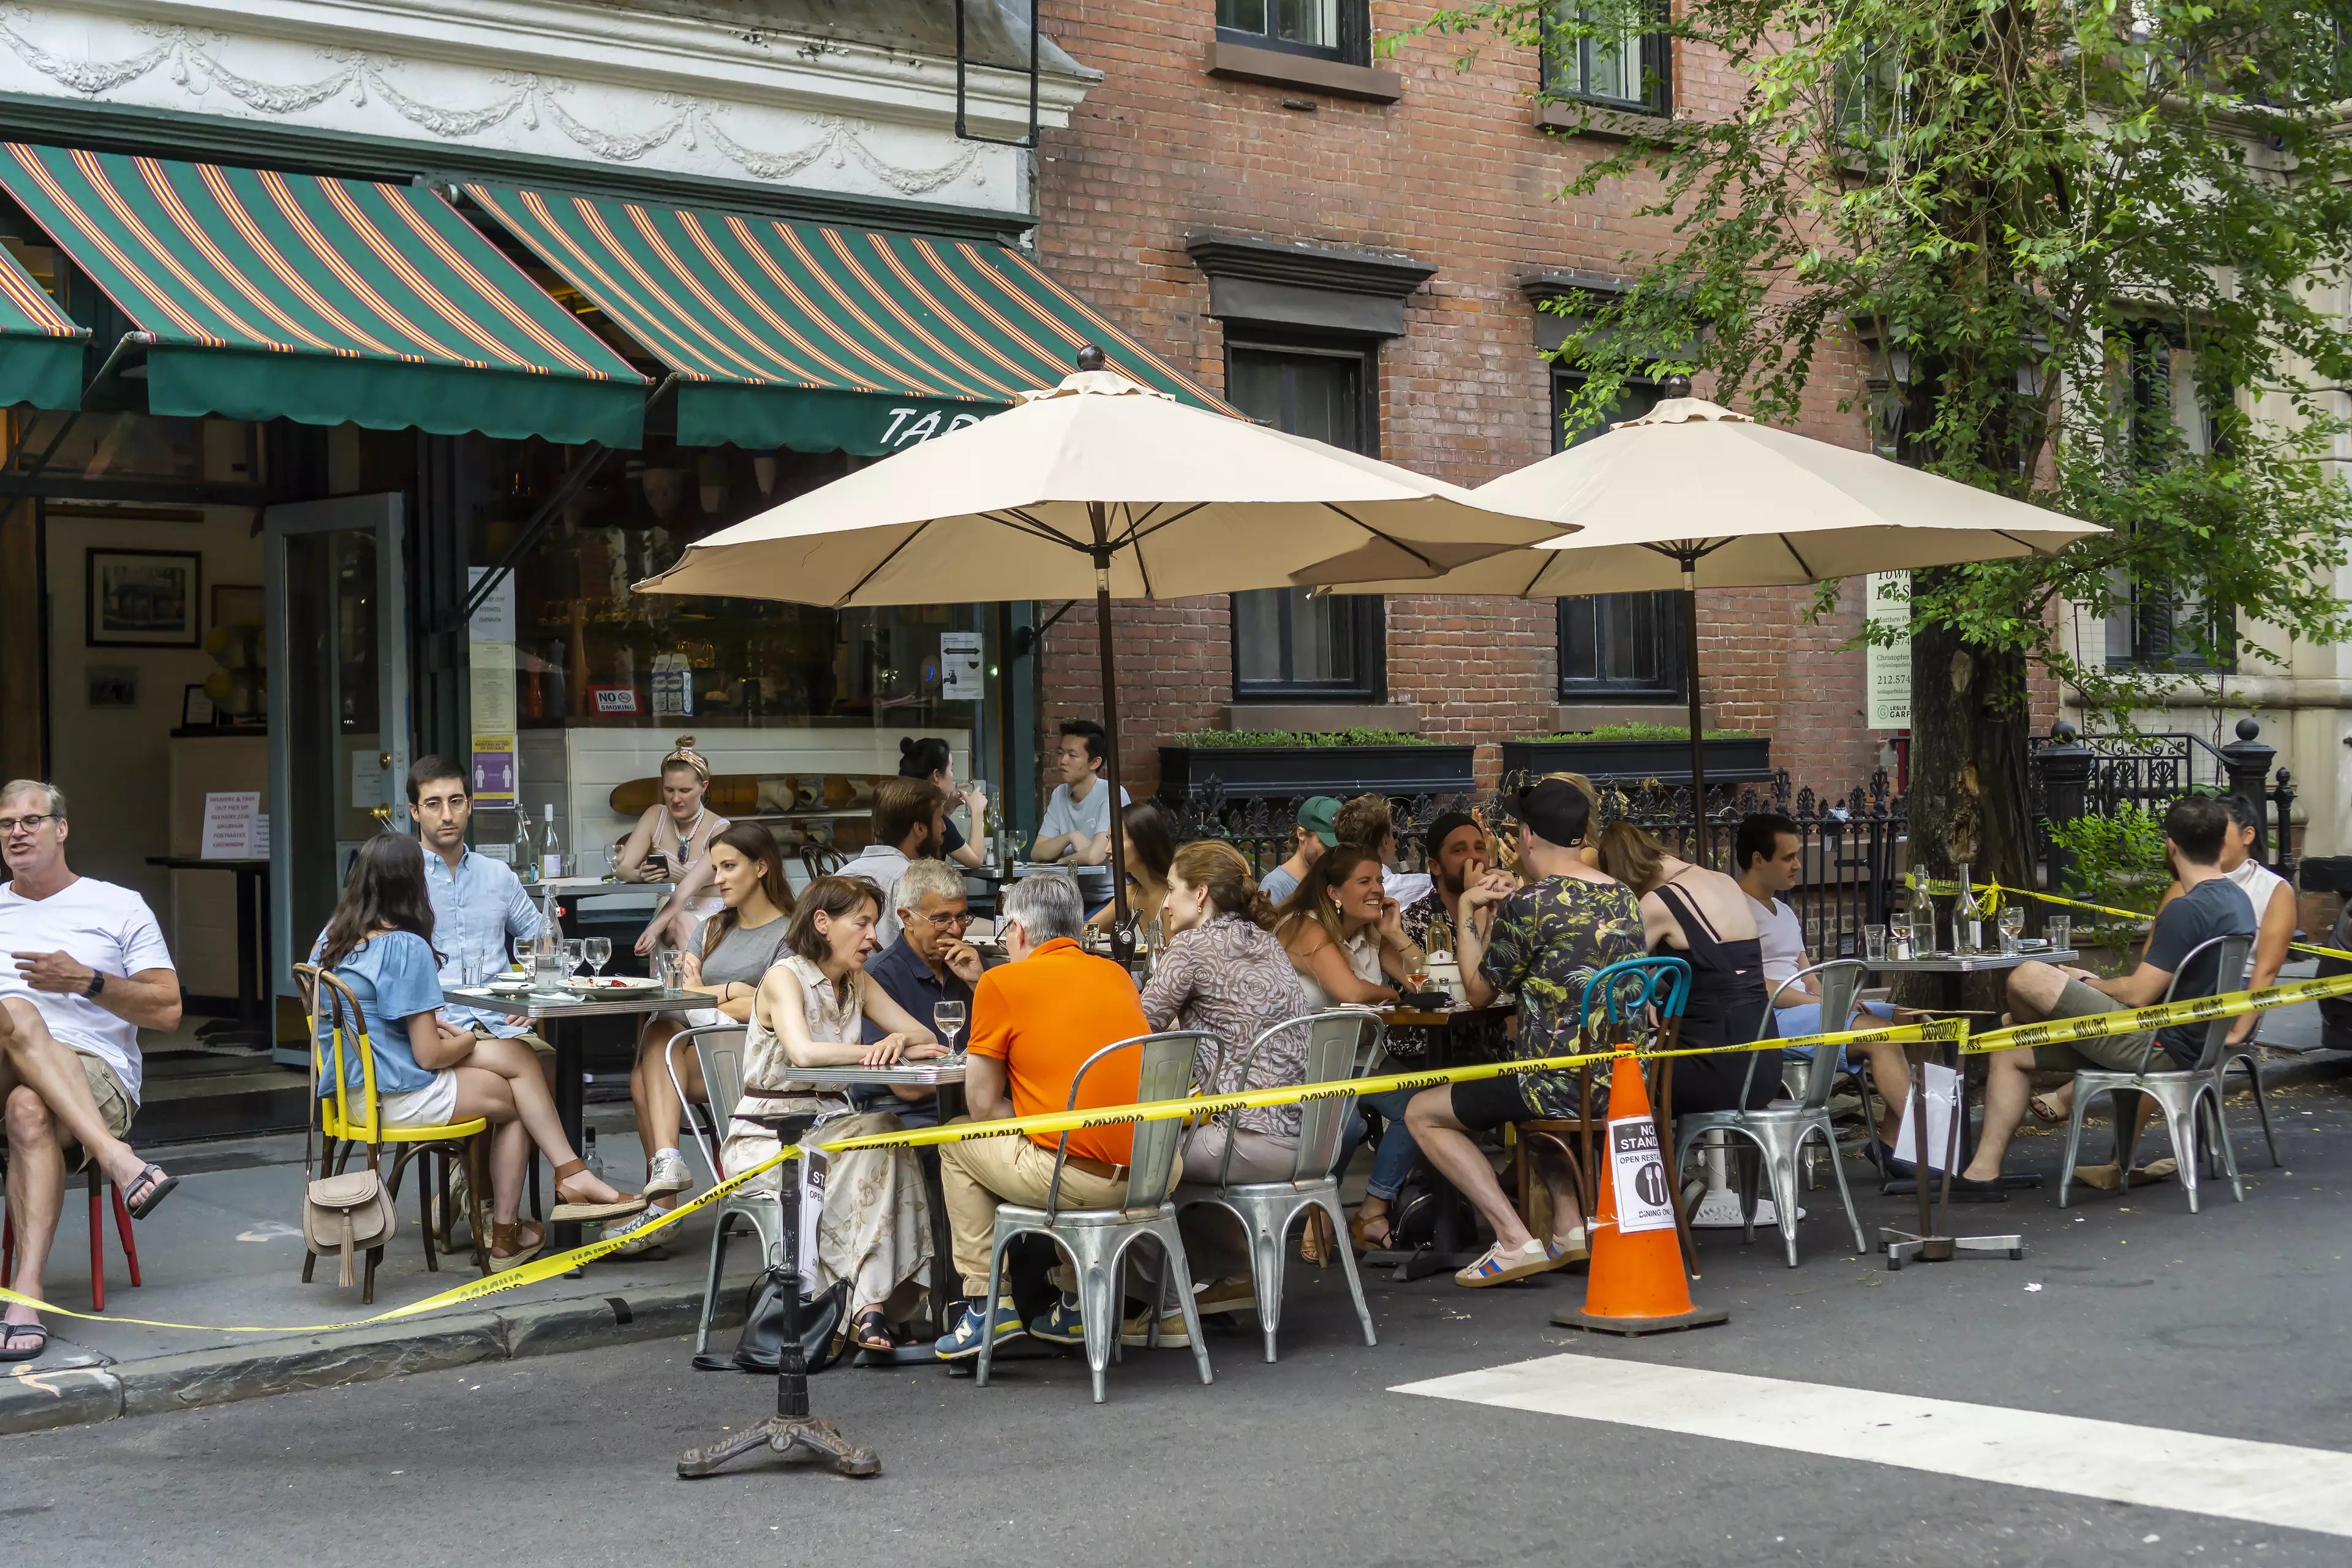 Pubs and bars have increased their outdoor dining options following lockdown.